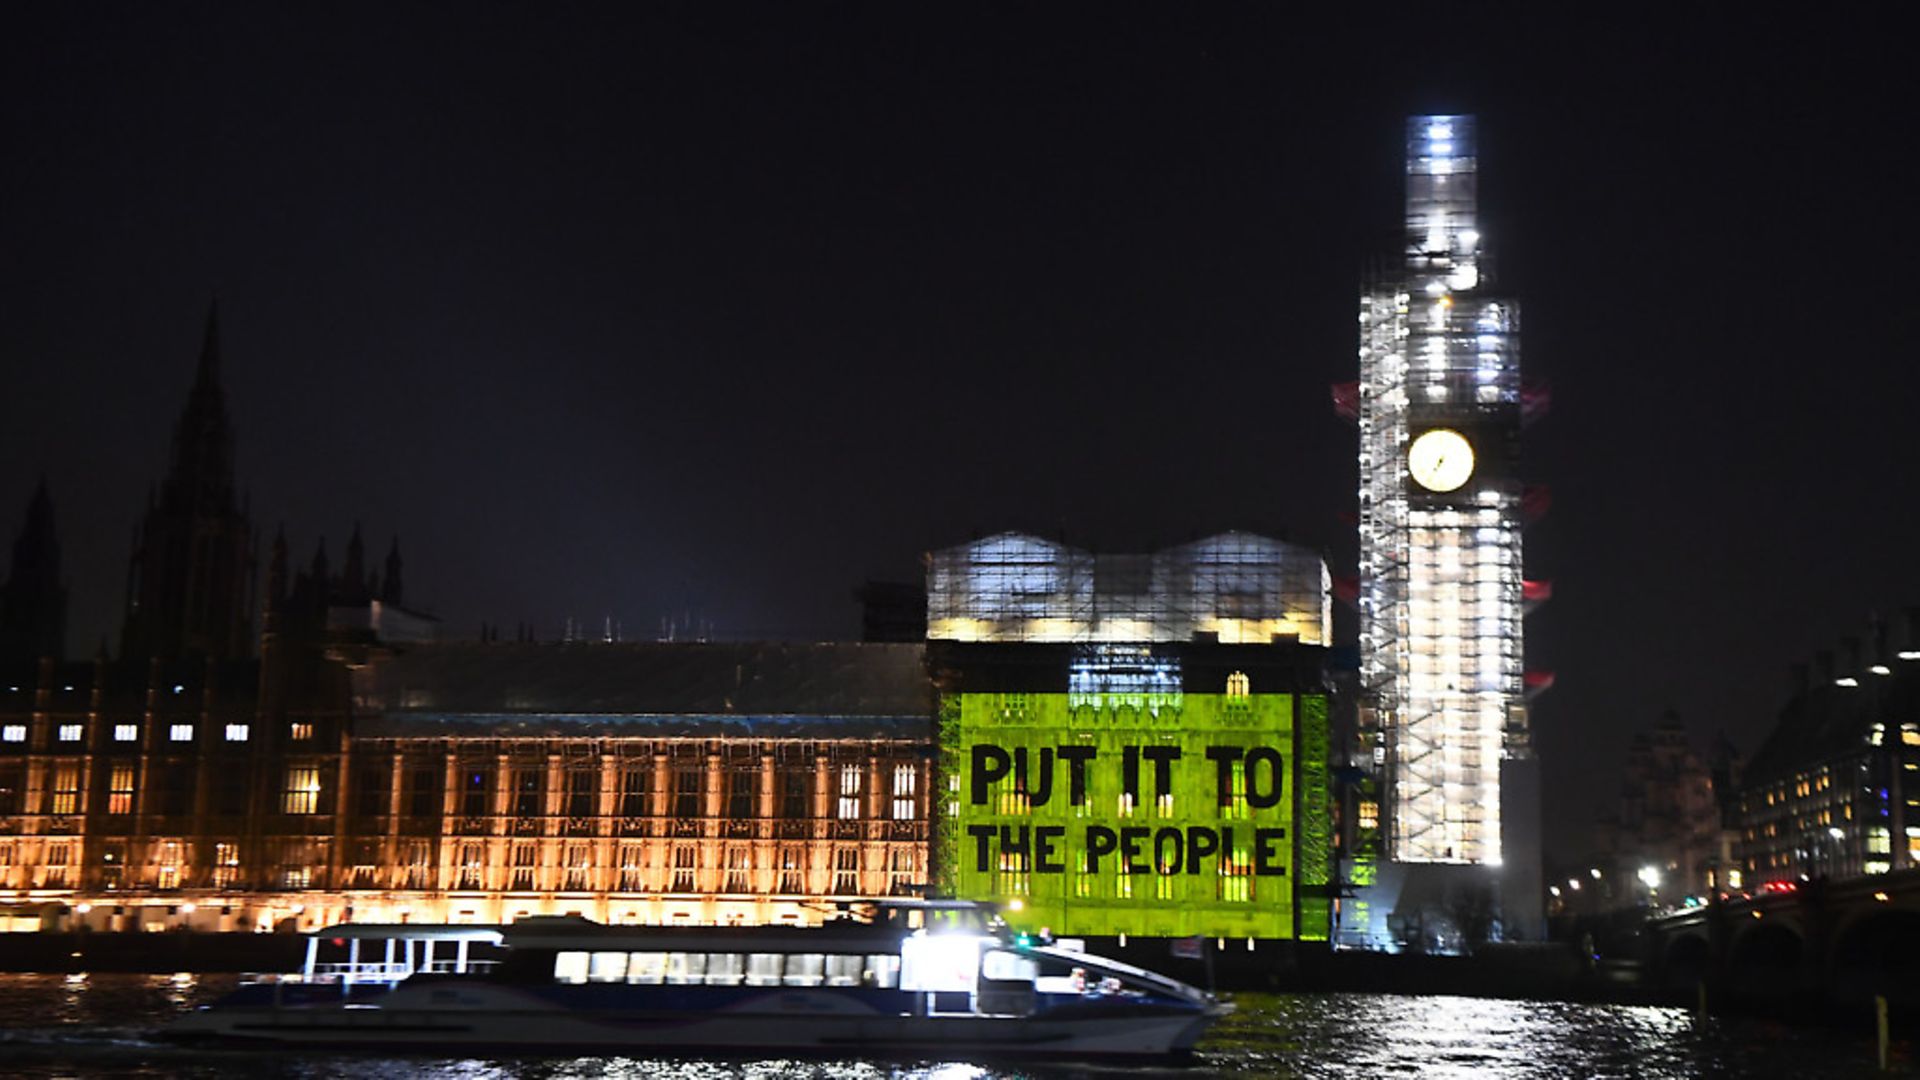 A message projected on to the House of Commons urges MPs to "put it to the people". Photograph: Victoria Jones/PA Wire. - Credit: PA